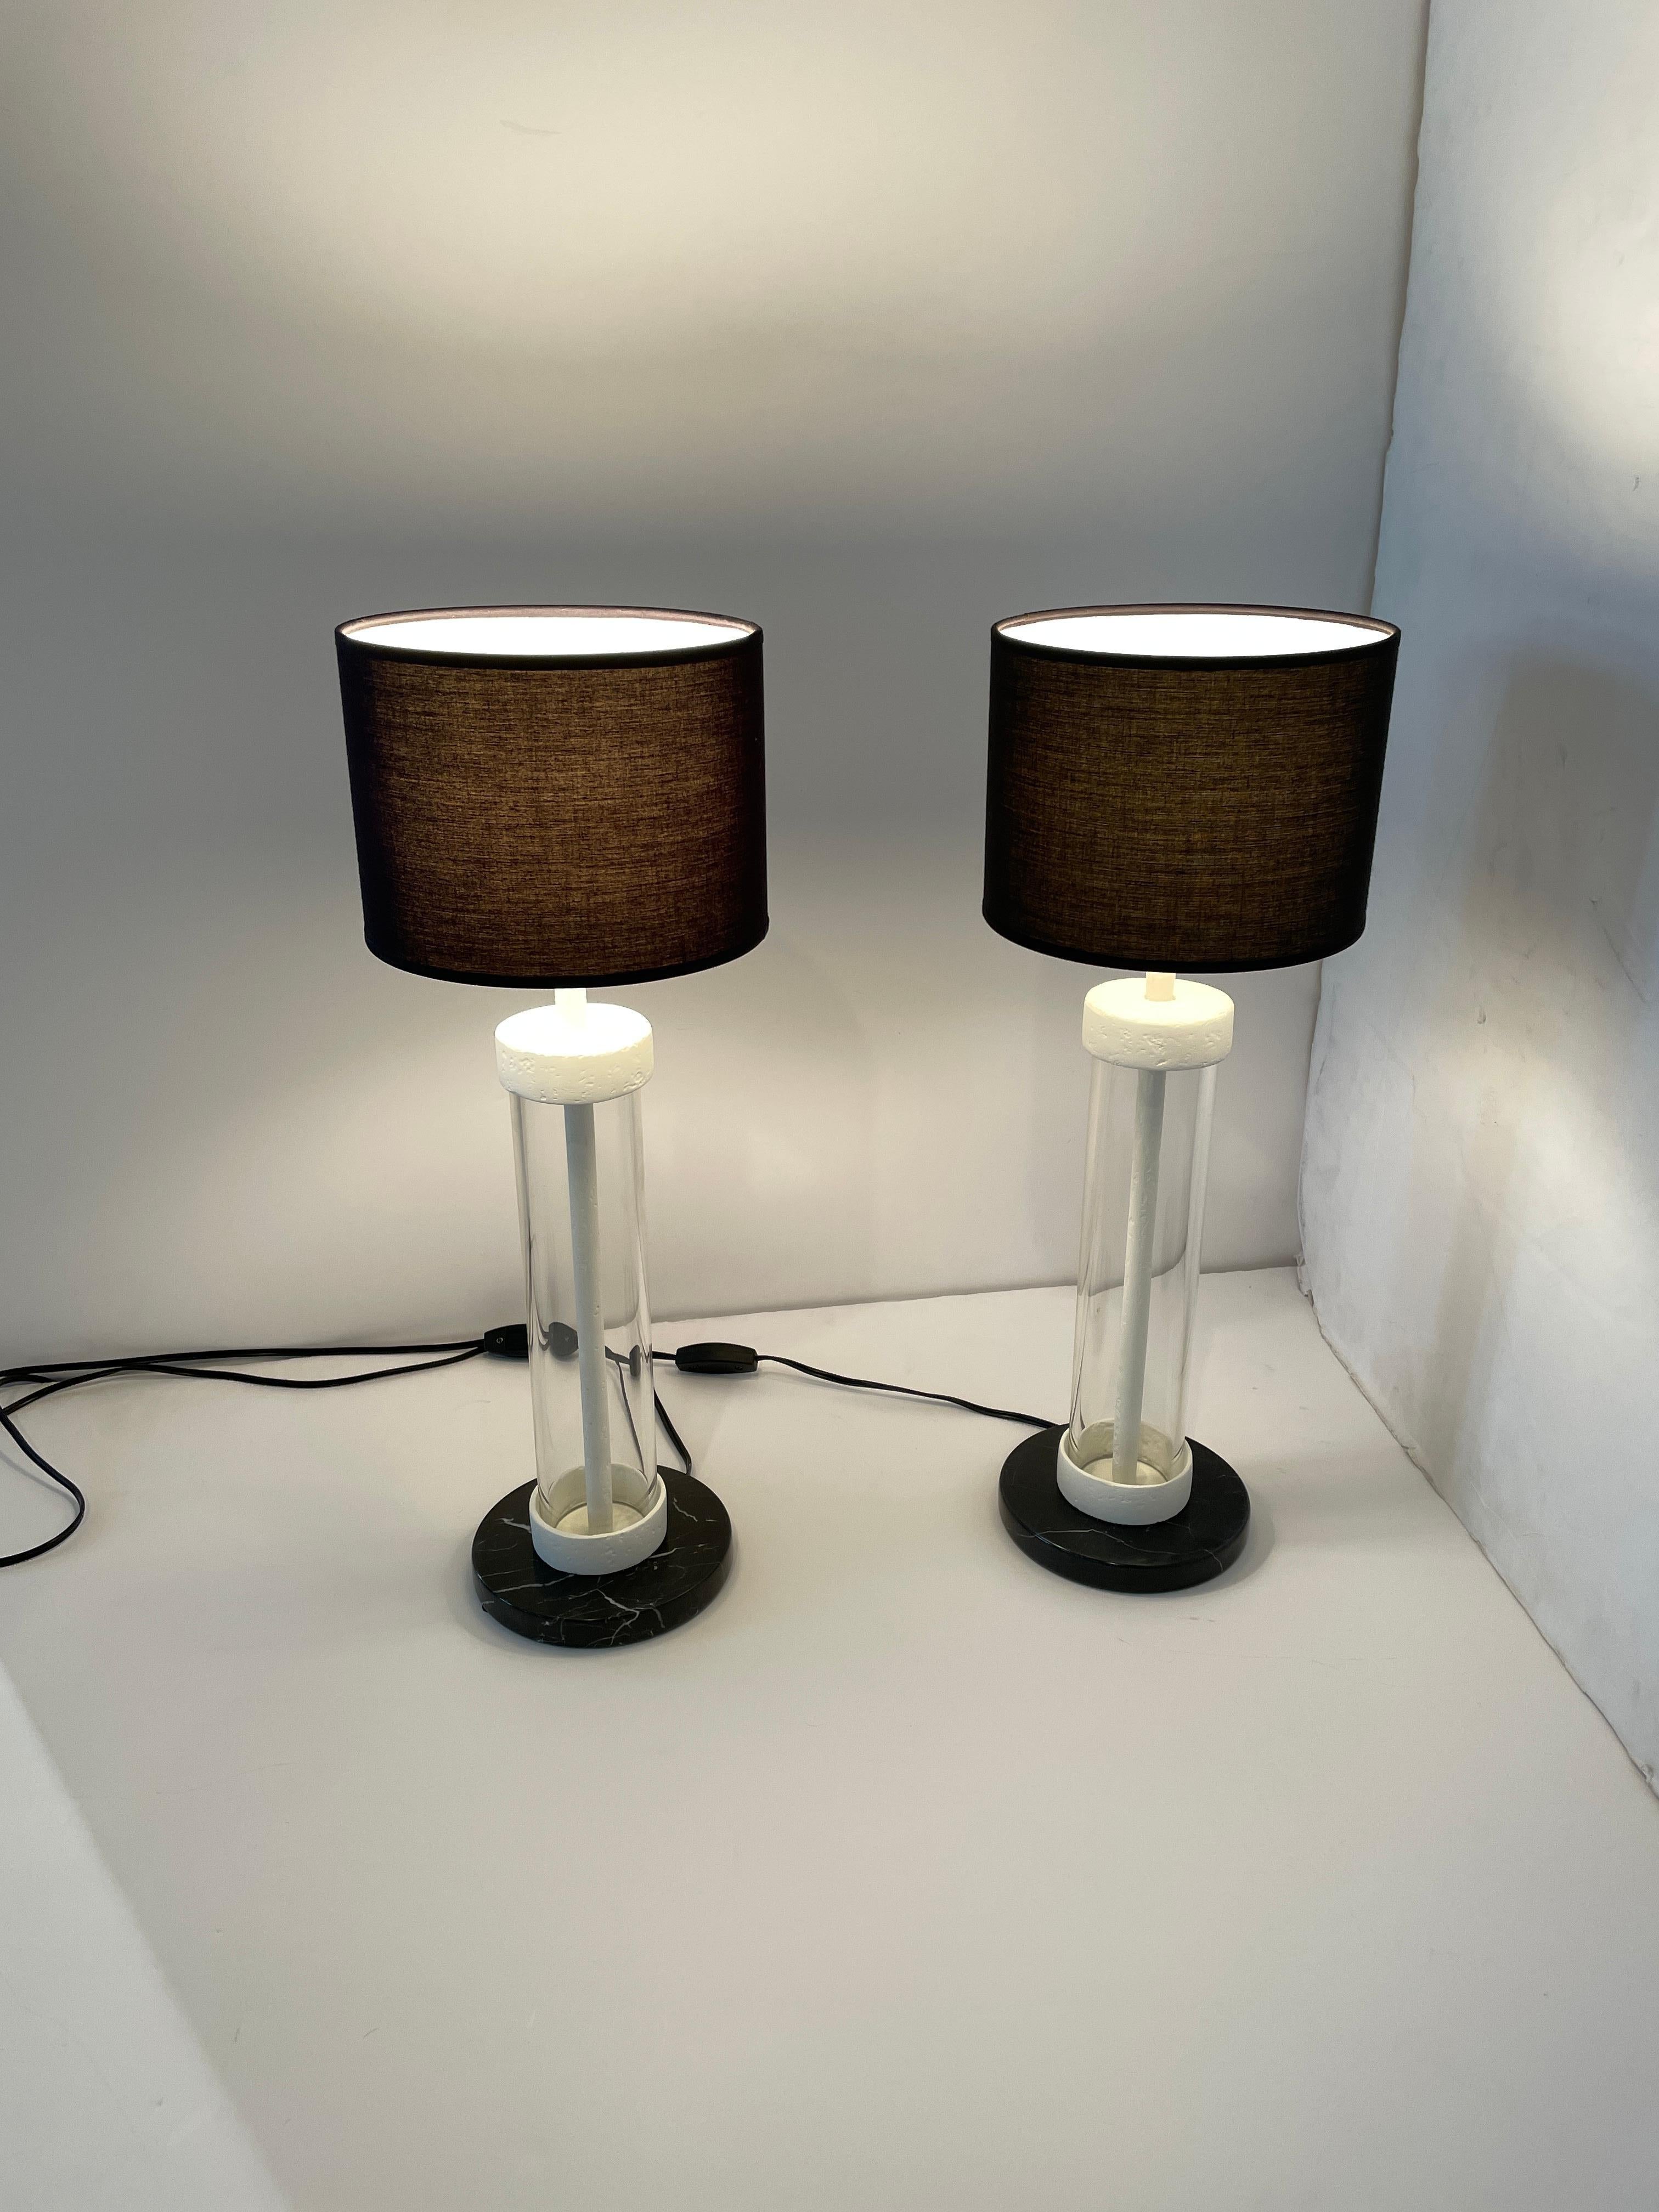 Two one of a kind table lamps with Belgium black marble bases, glass tube bodies and plaster of paris accents. The lights are topped with a black linen shade. Great for side tables, bed side tables. The contrast with the black and white elements